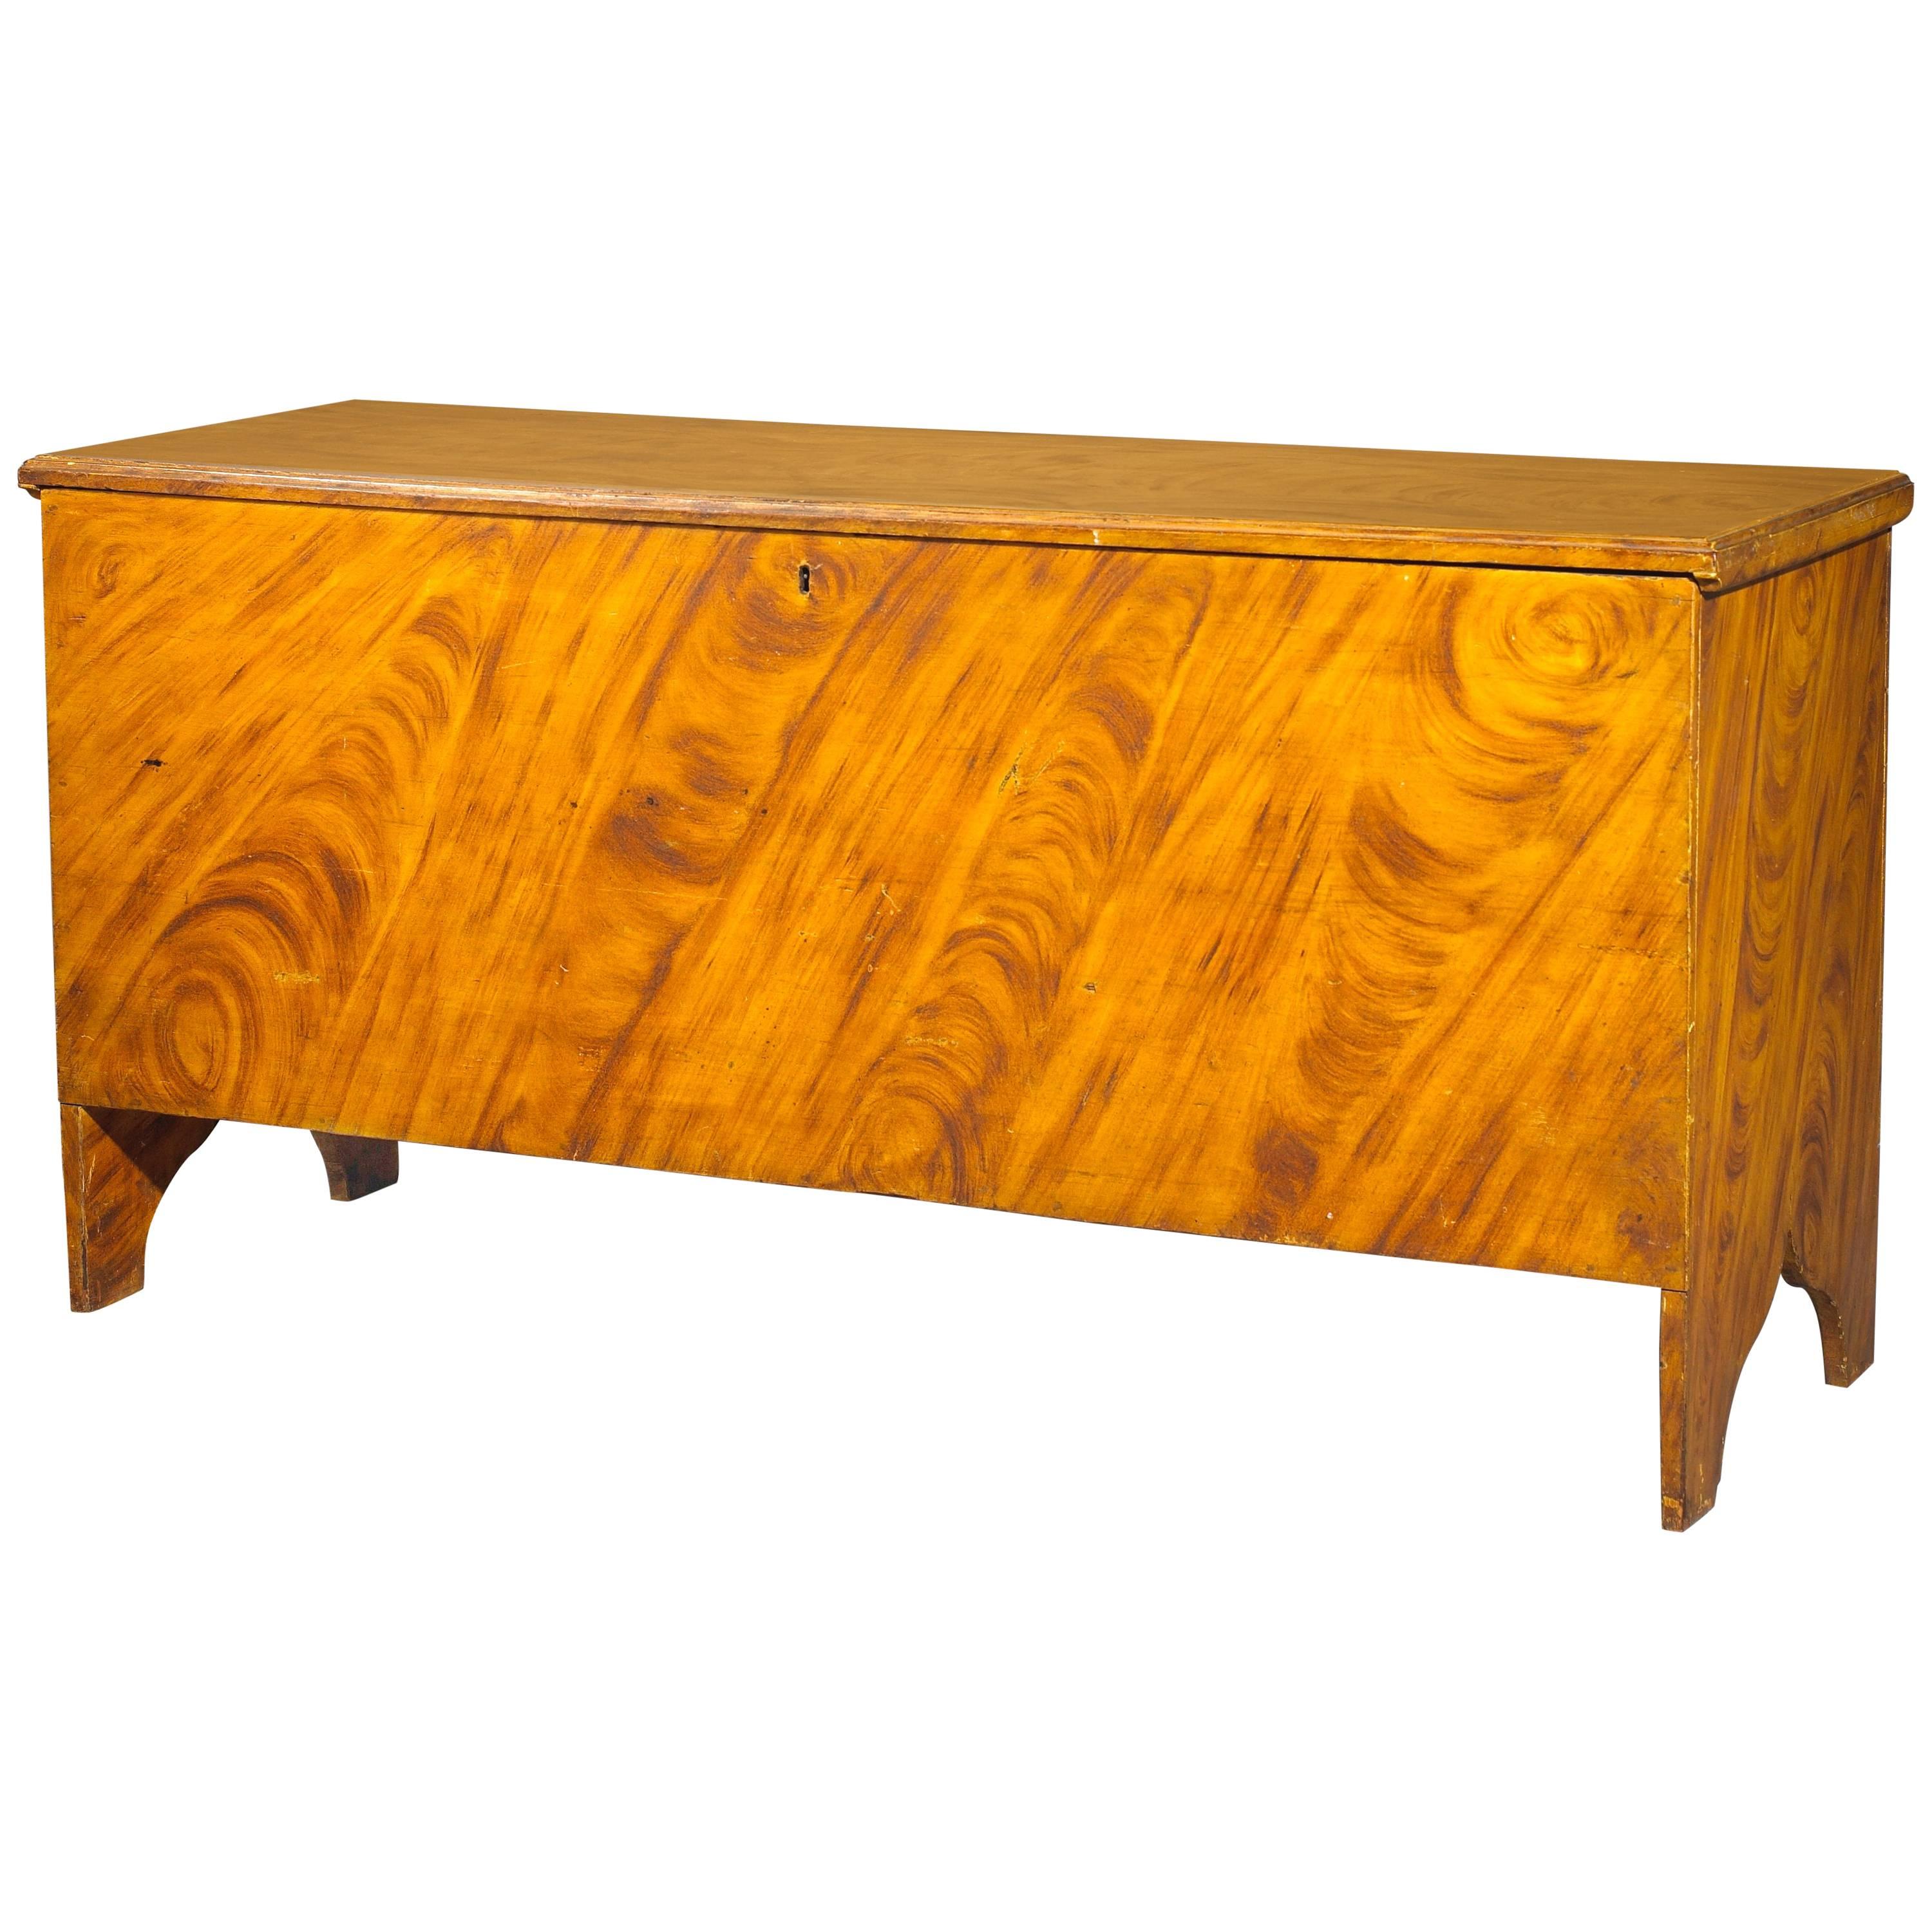 Sienna and Ochre Gain-Painted Six-Board Blanket Chest For Sale